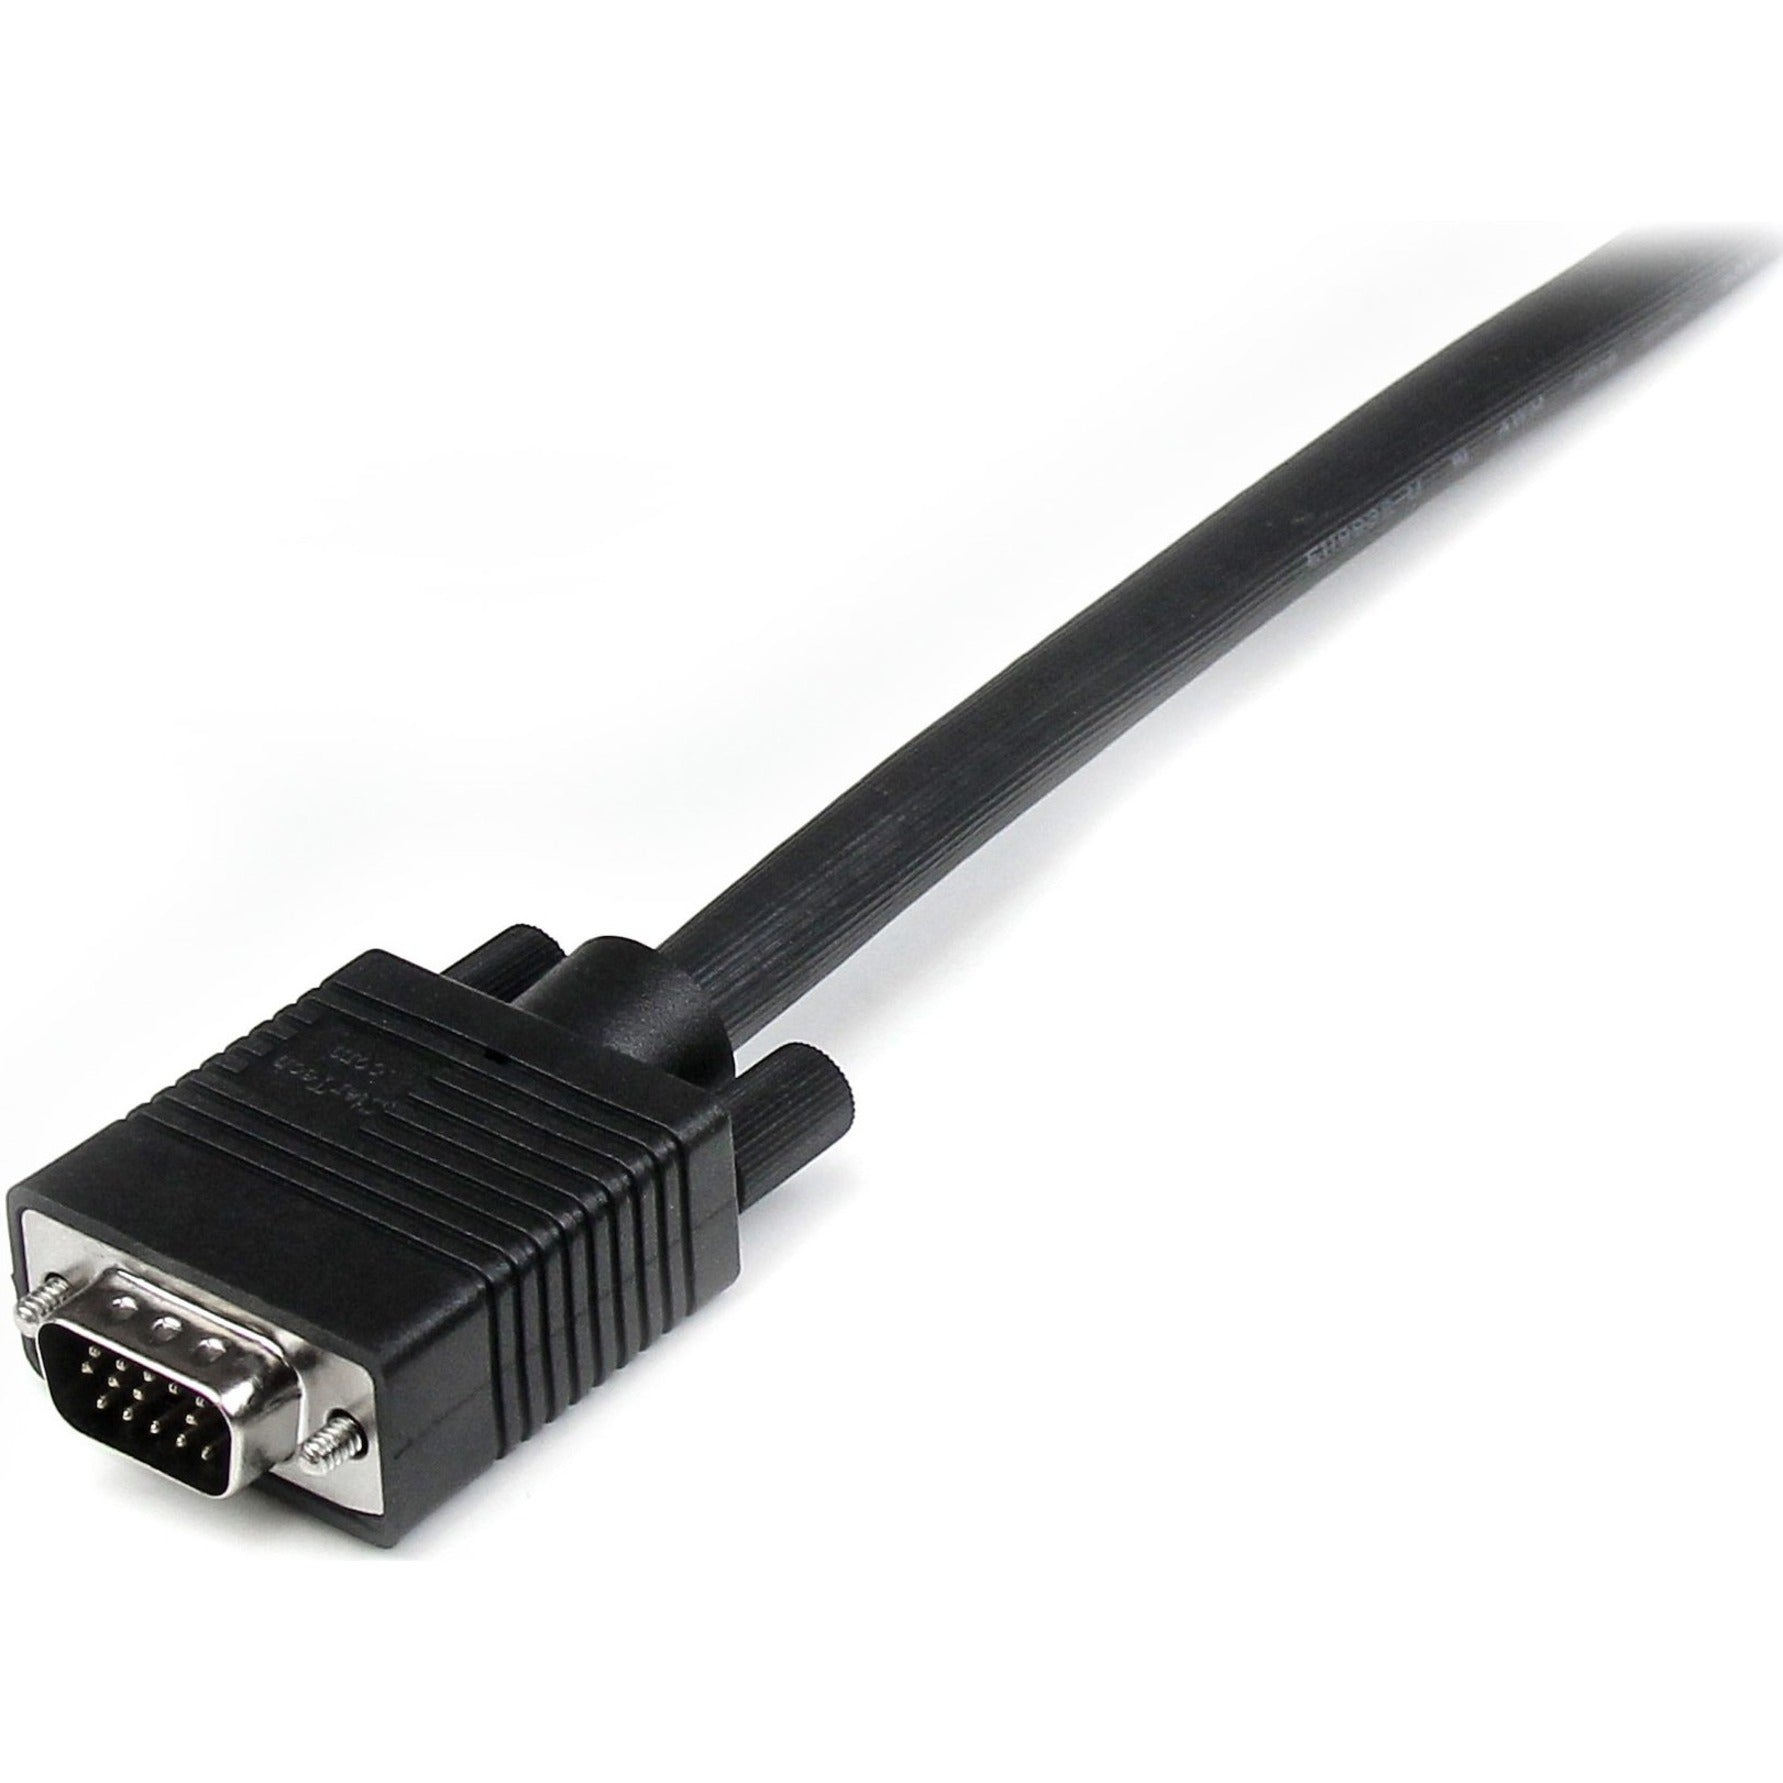 StarTech.com MXT101MMHQ25 Coax High Resolution Monitor VGA Cable, 25 ft, Crystal Clear Display